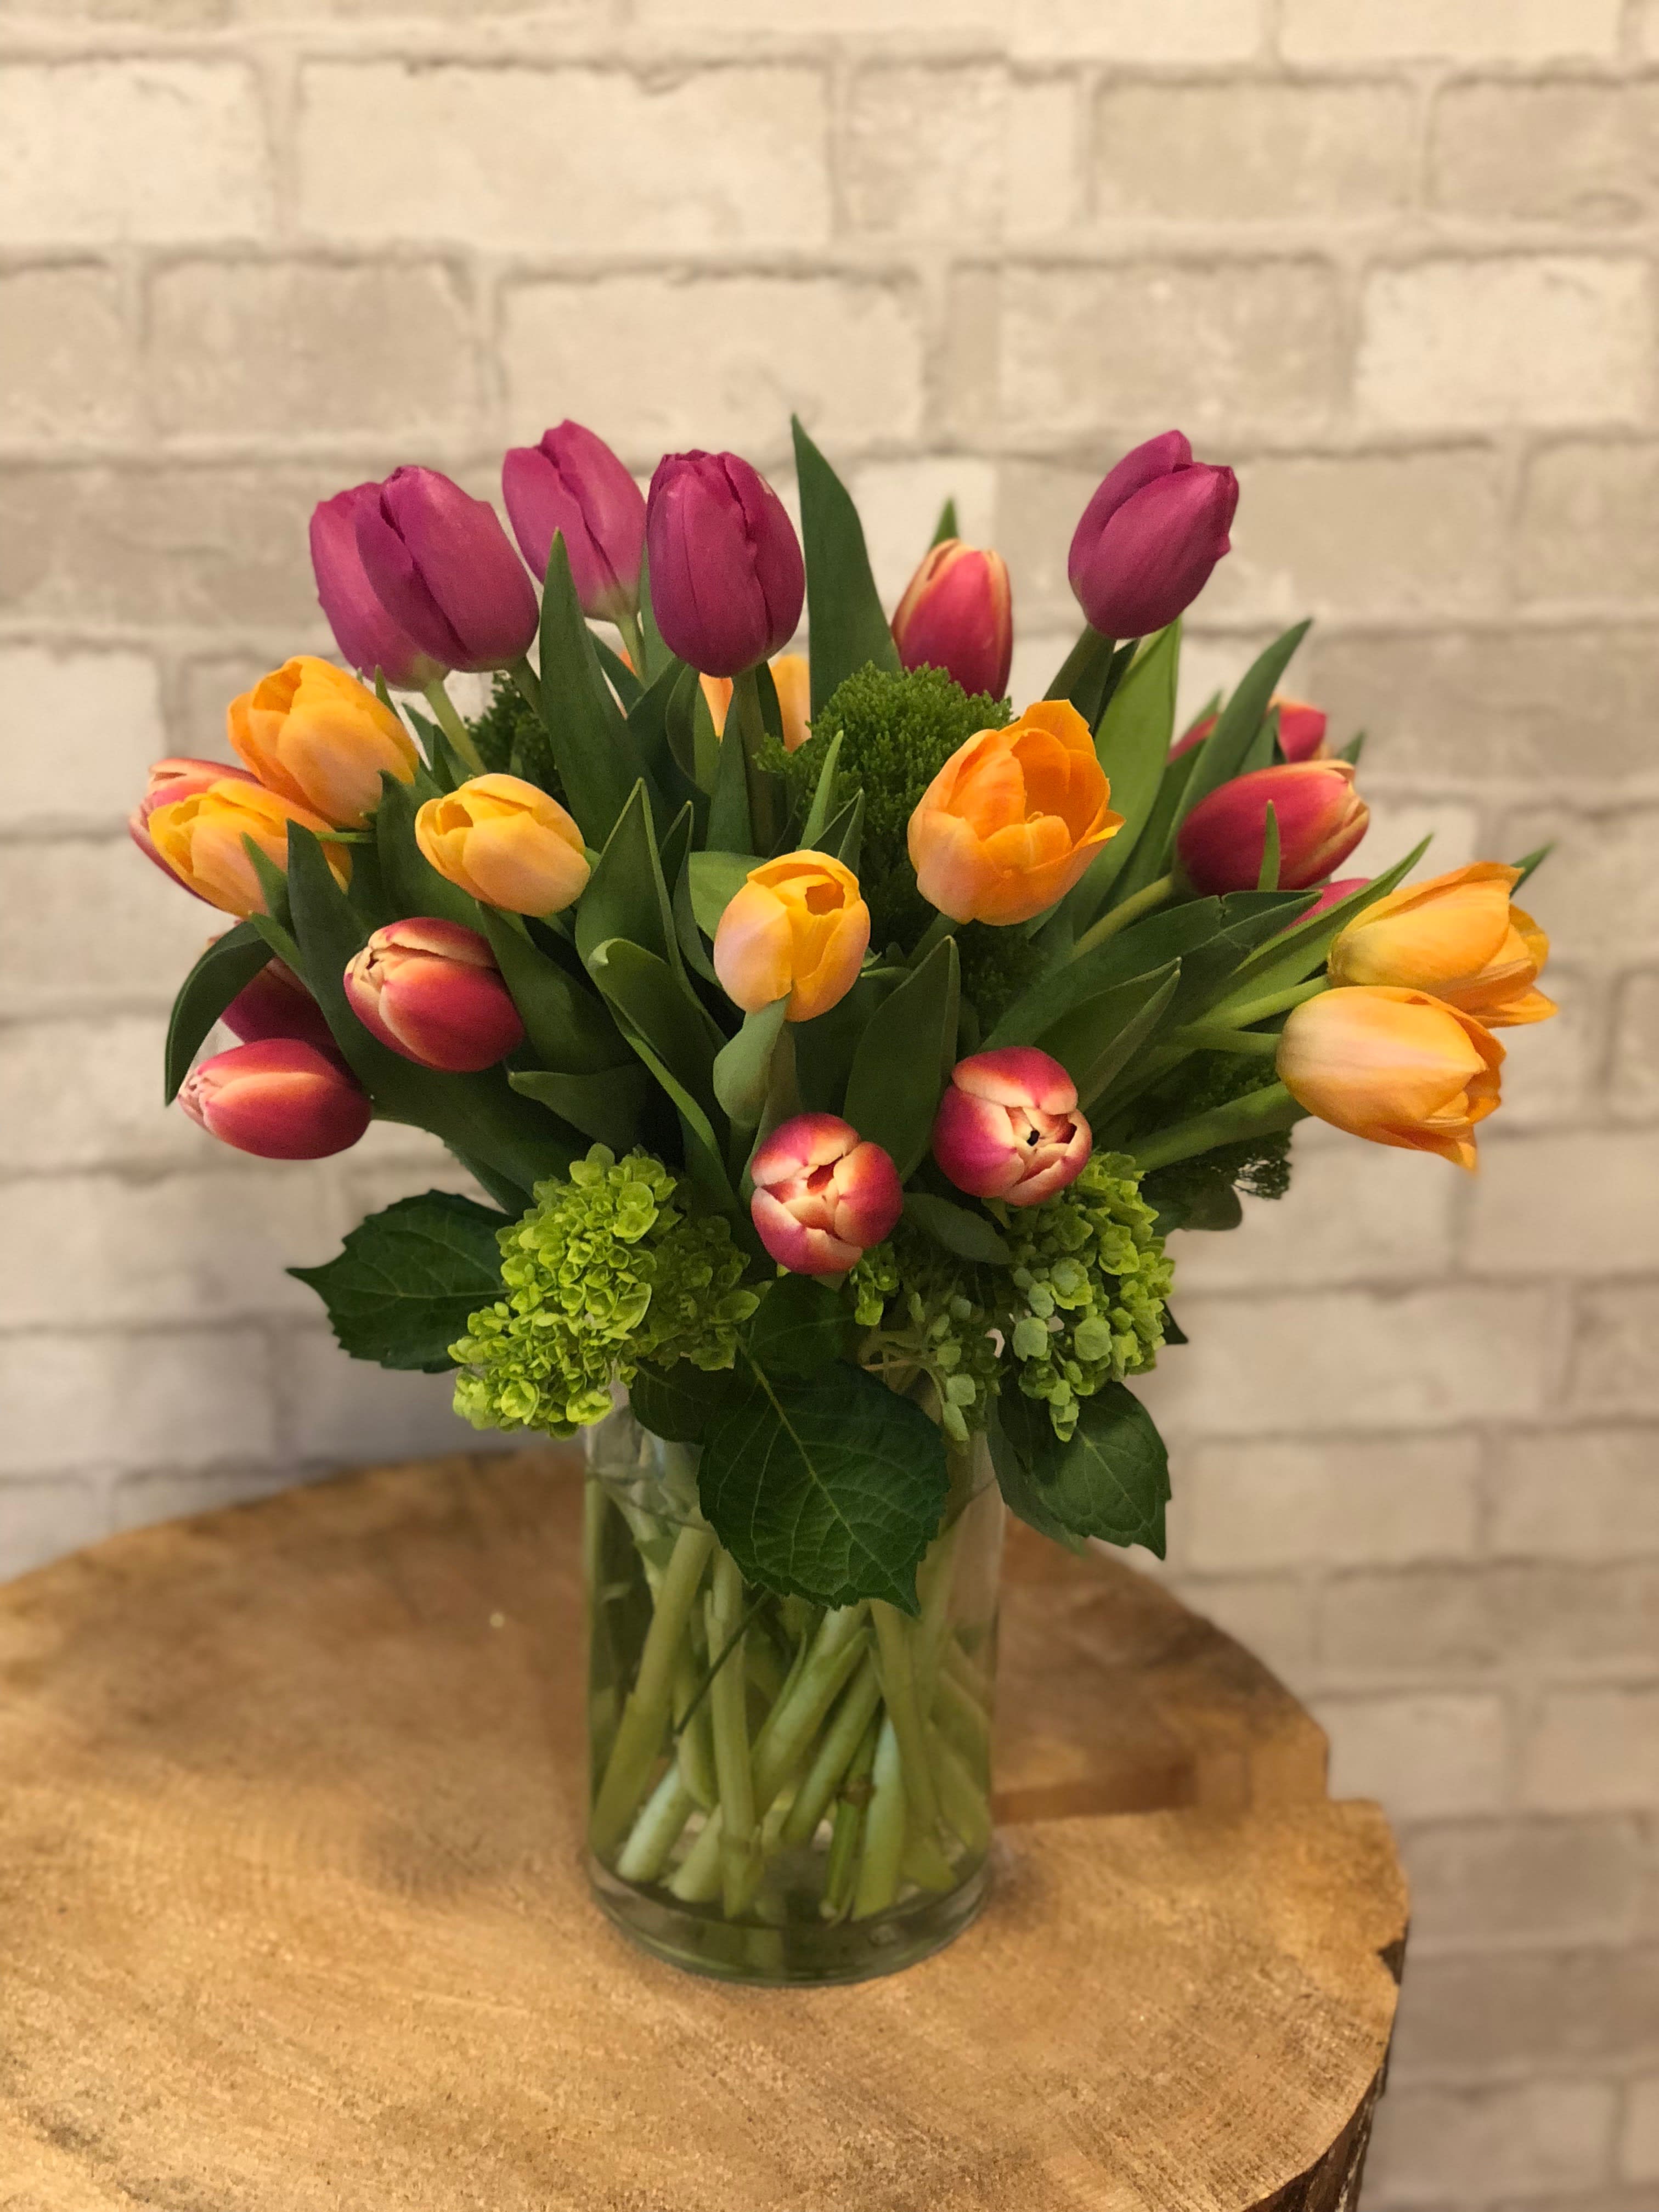 Spring Tulips - A plethora of color in a medium sized glass vase.  Nothing says spring is here quite like a trip-colored tulip arrangement.  Send some spring today!